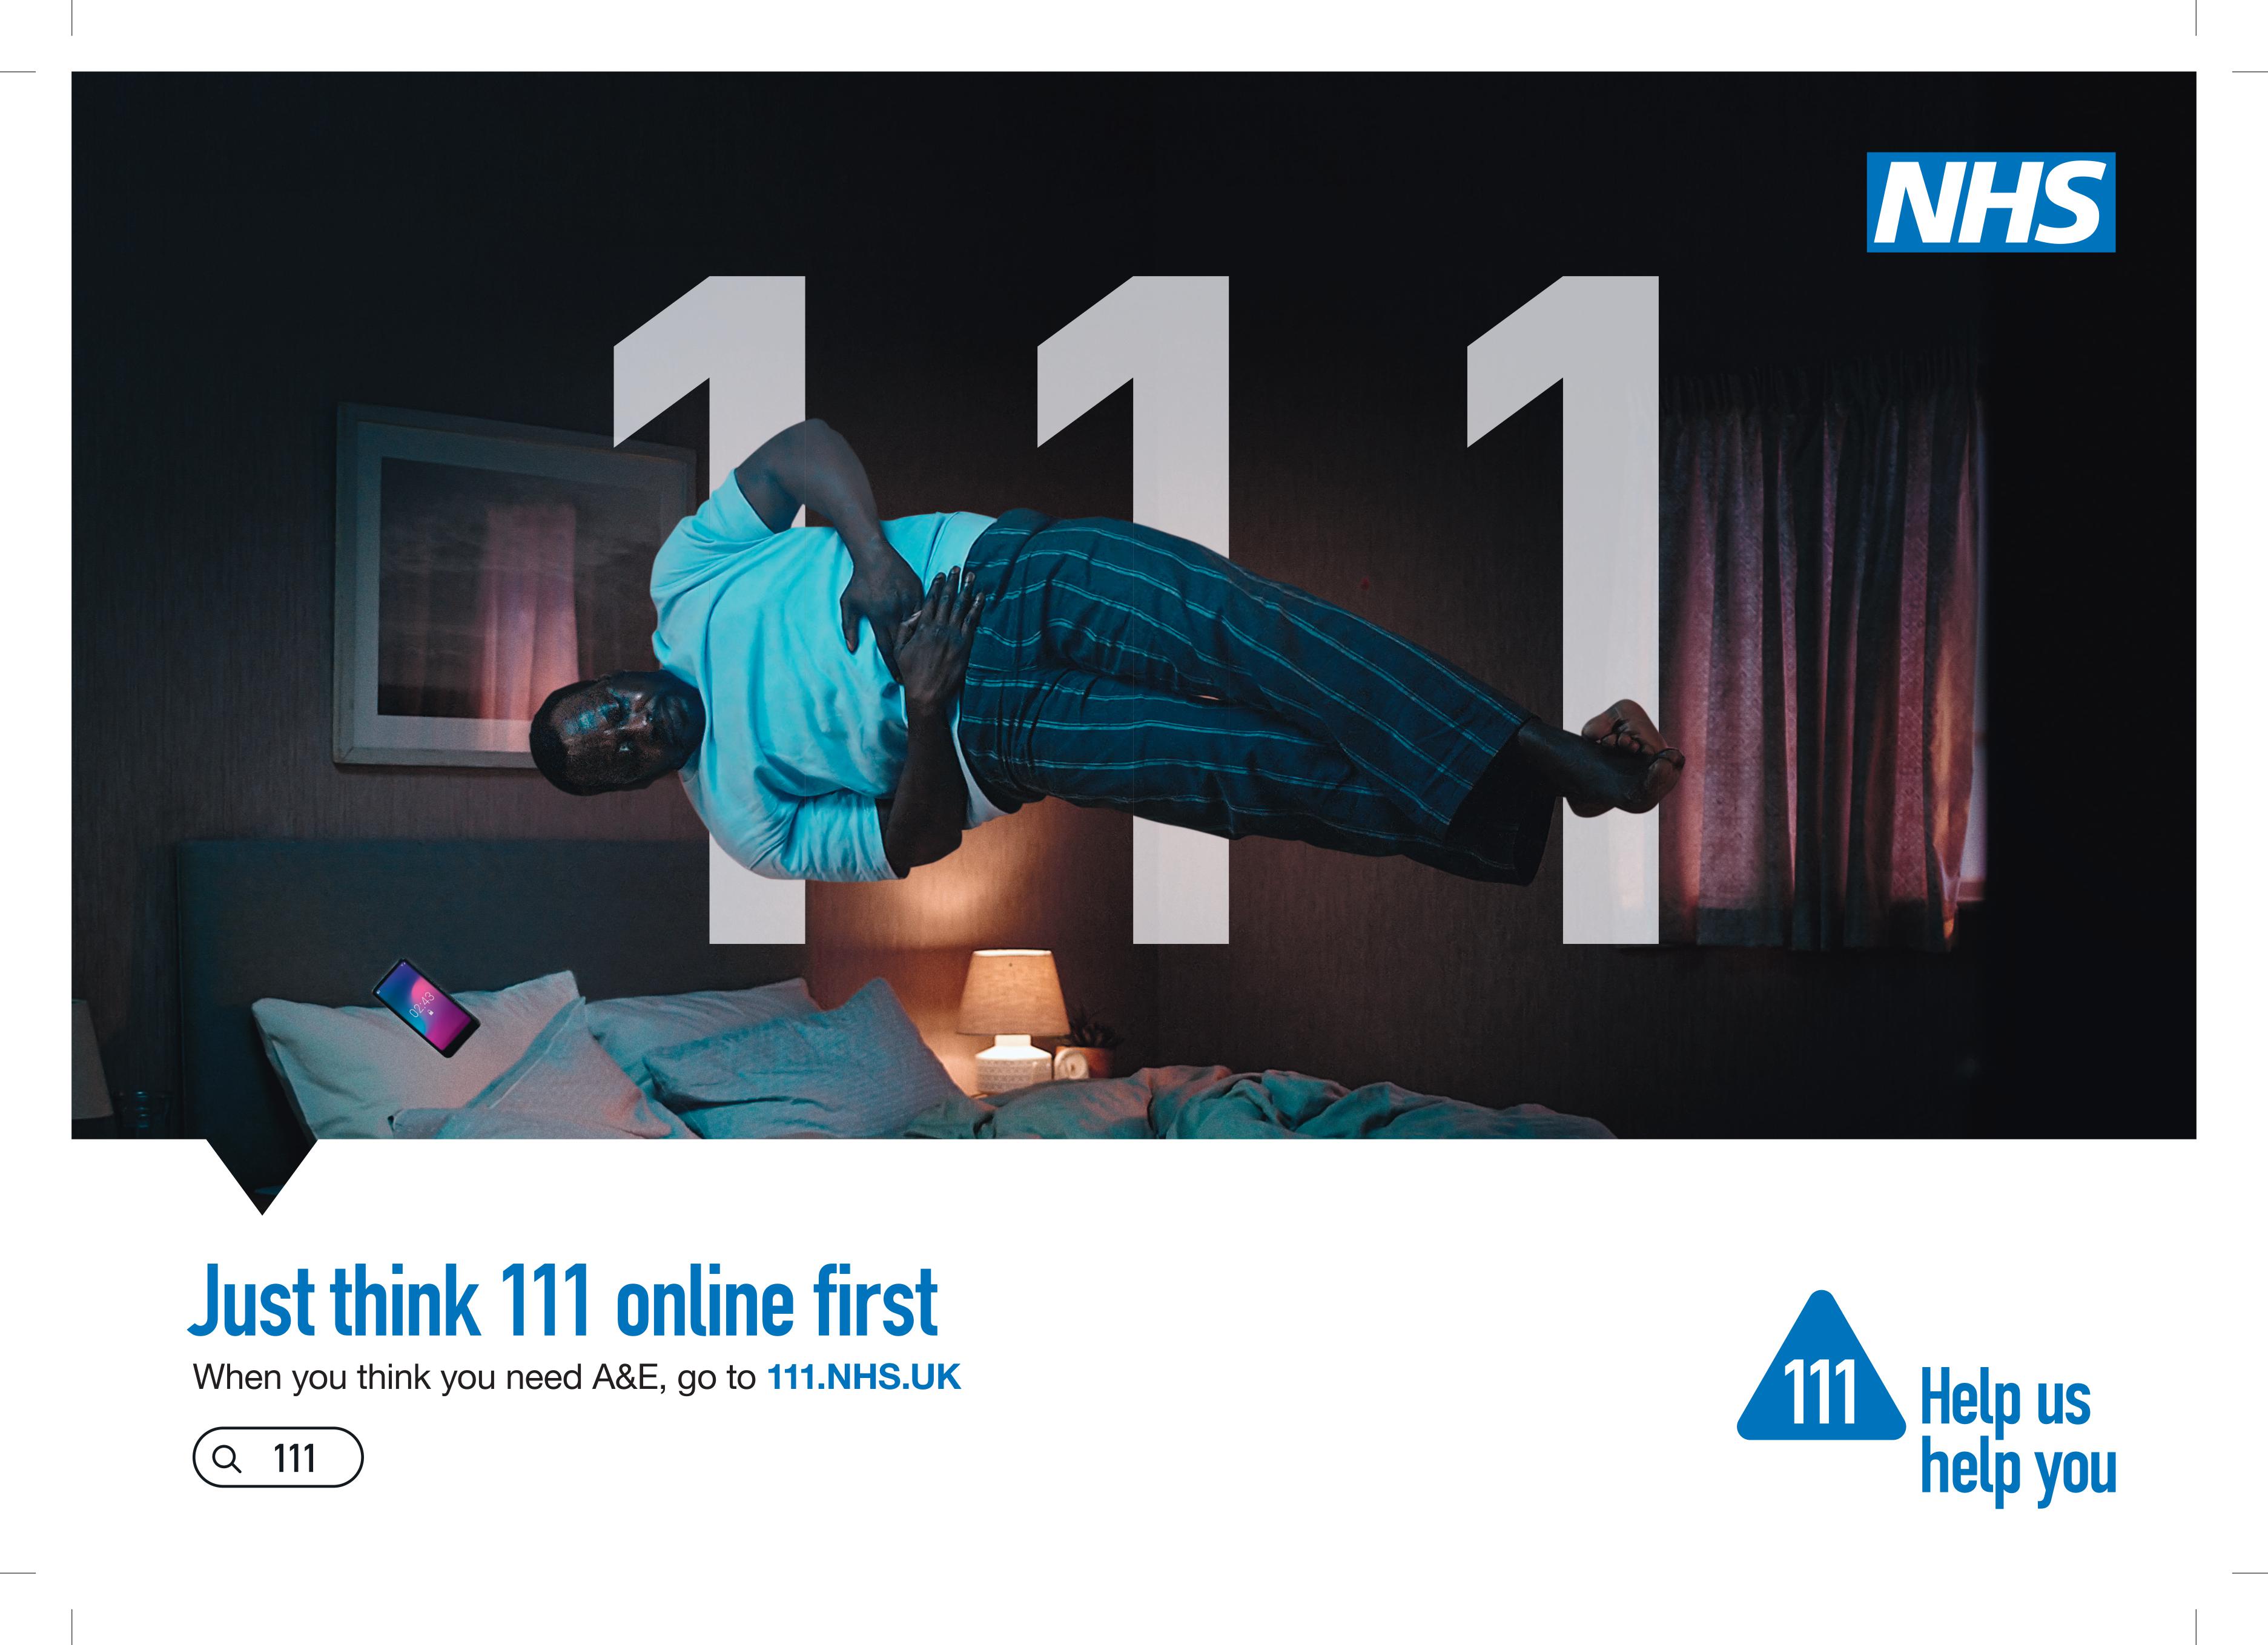 Just think 111 online first when you think you need A&E go to 111.nhs.uk